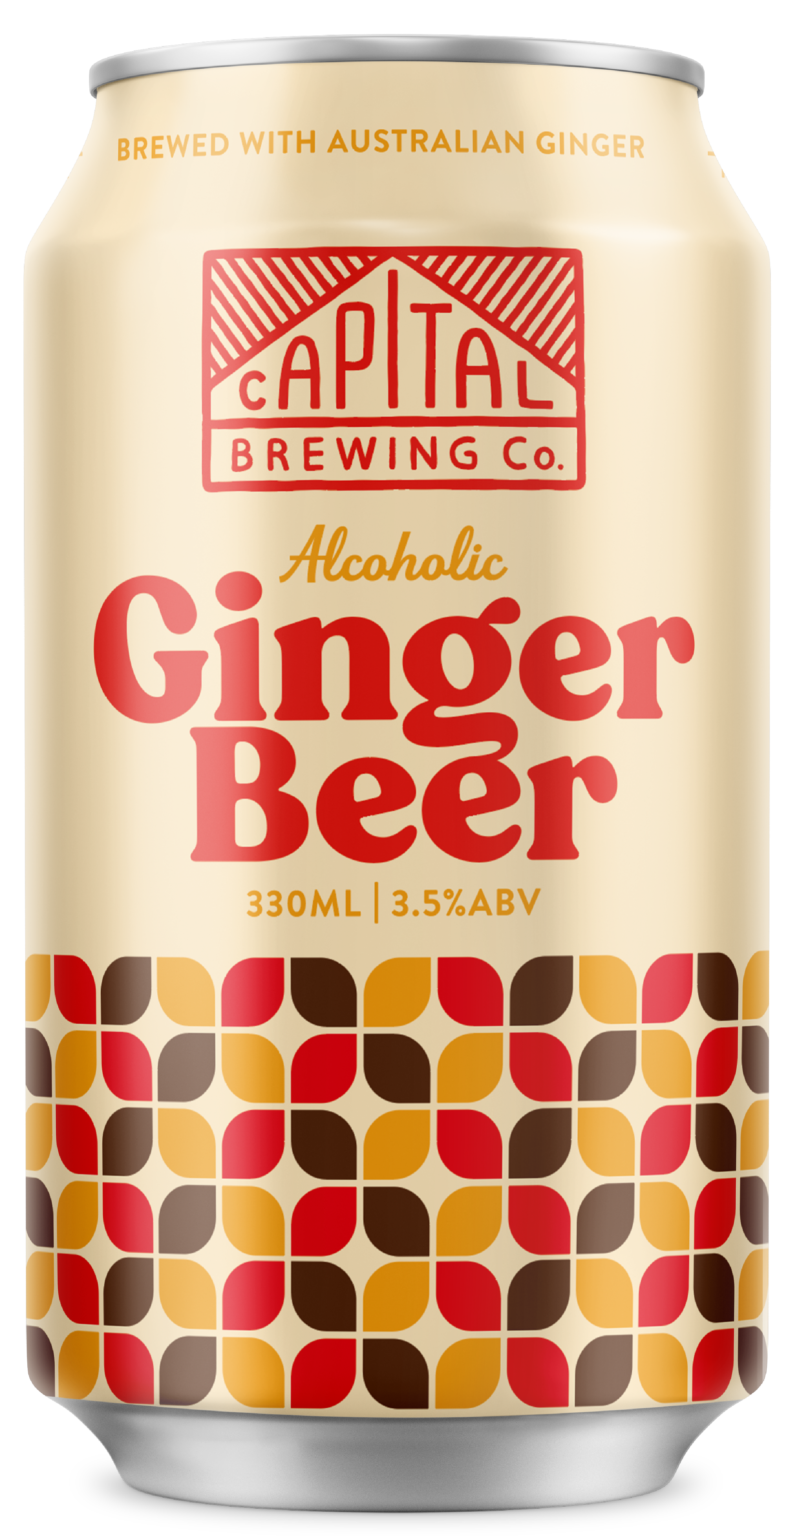 Capital Brewing Co Ginger Beer